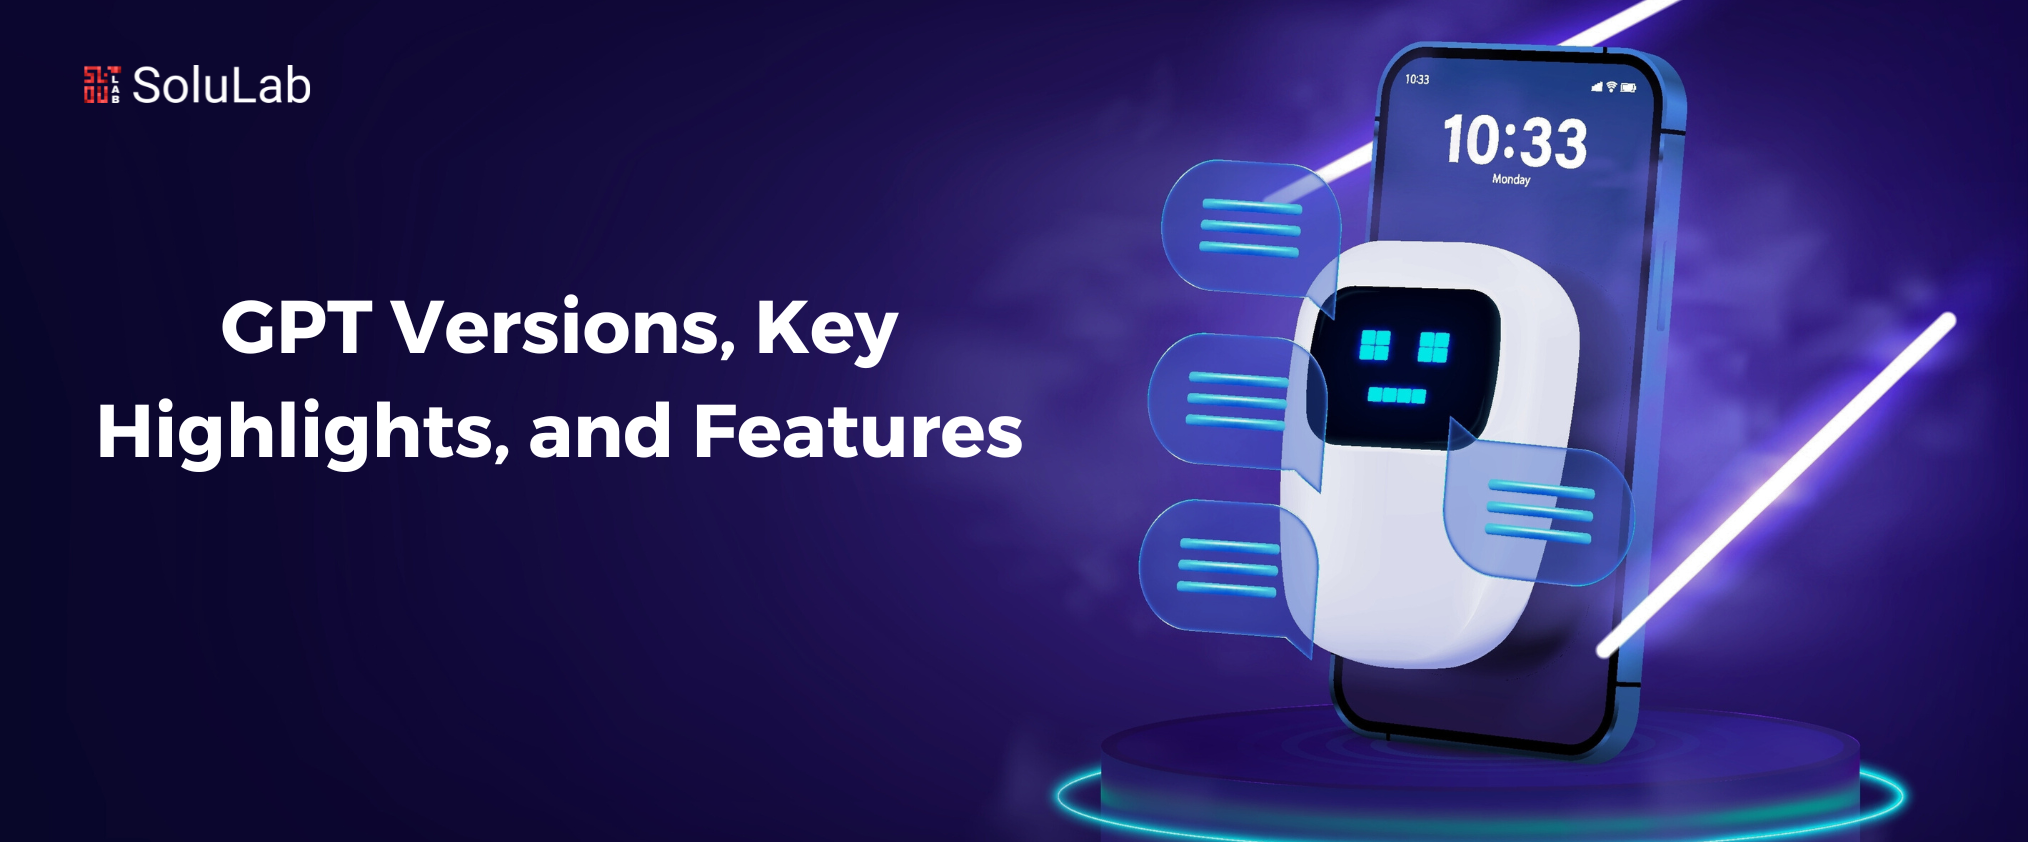 GPT Versions, Key Highlights, and Features